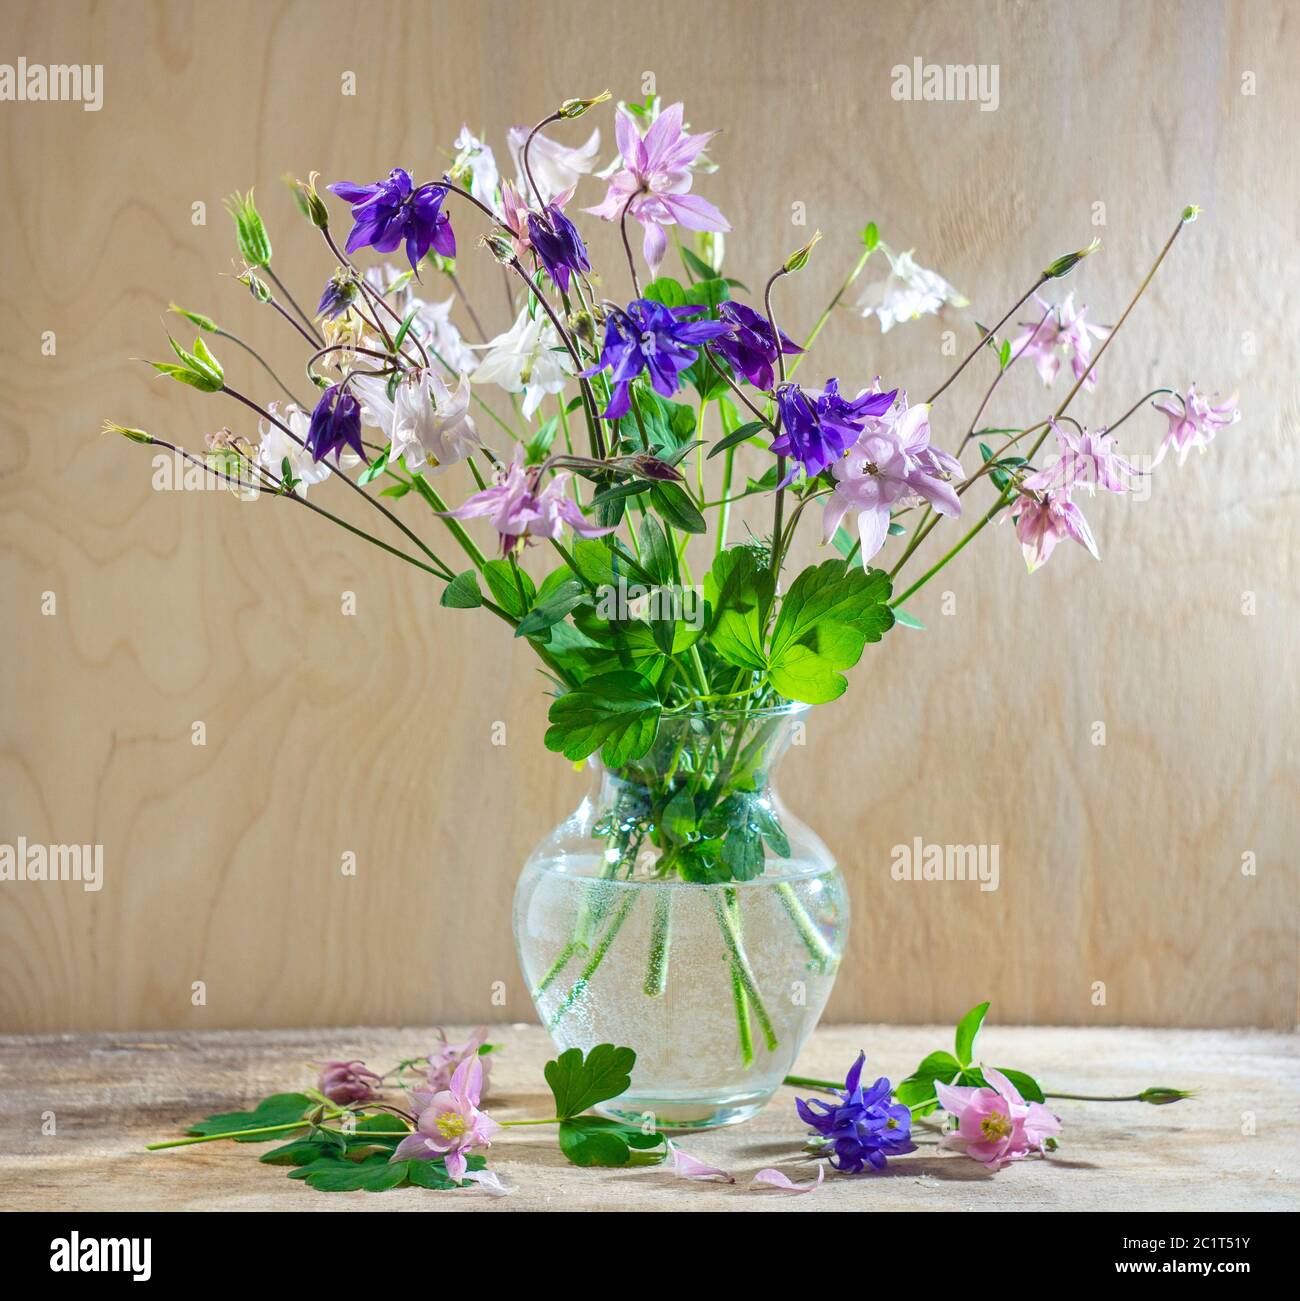 Rustic still life in a glass vase beautiful flowers pink white blue Aquilegia wooden background. Aquilégia vulgáris of the Buttercup family Stock Photo